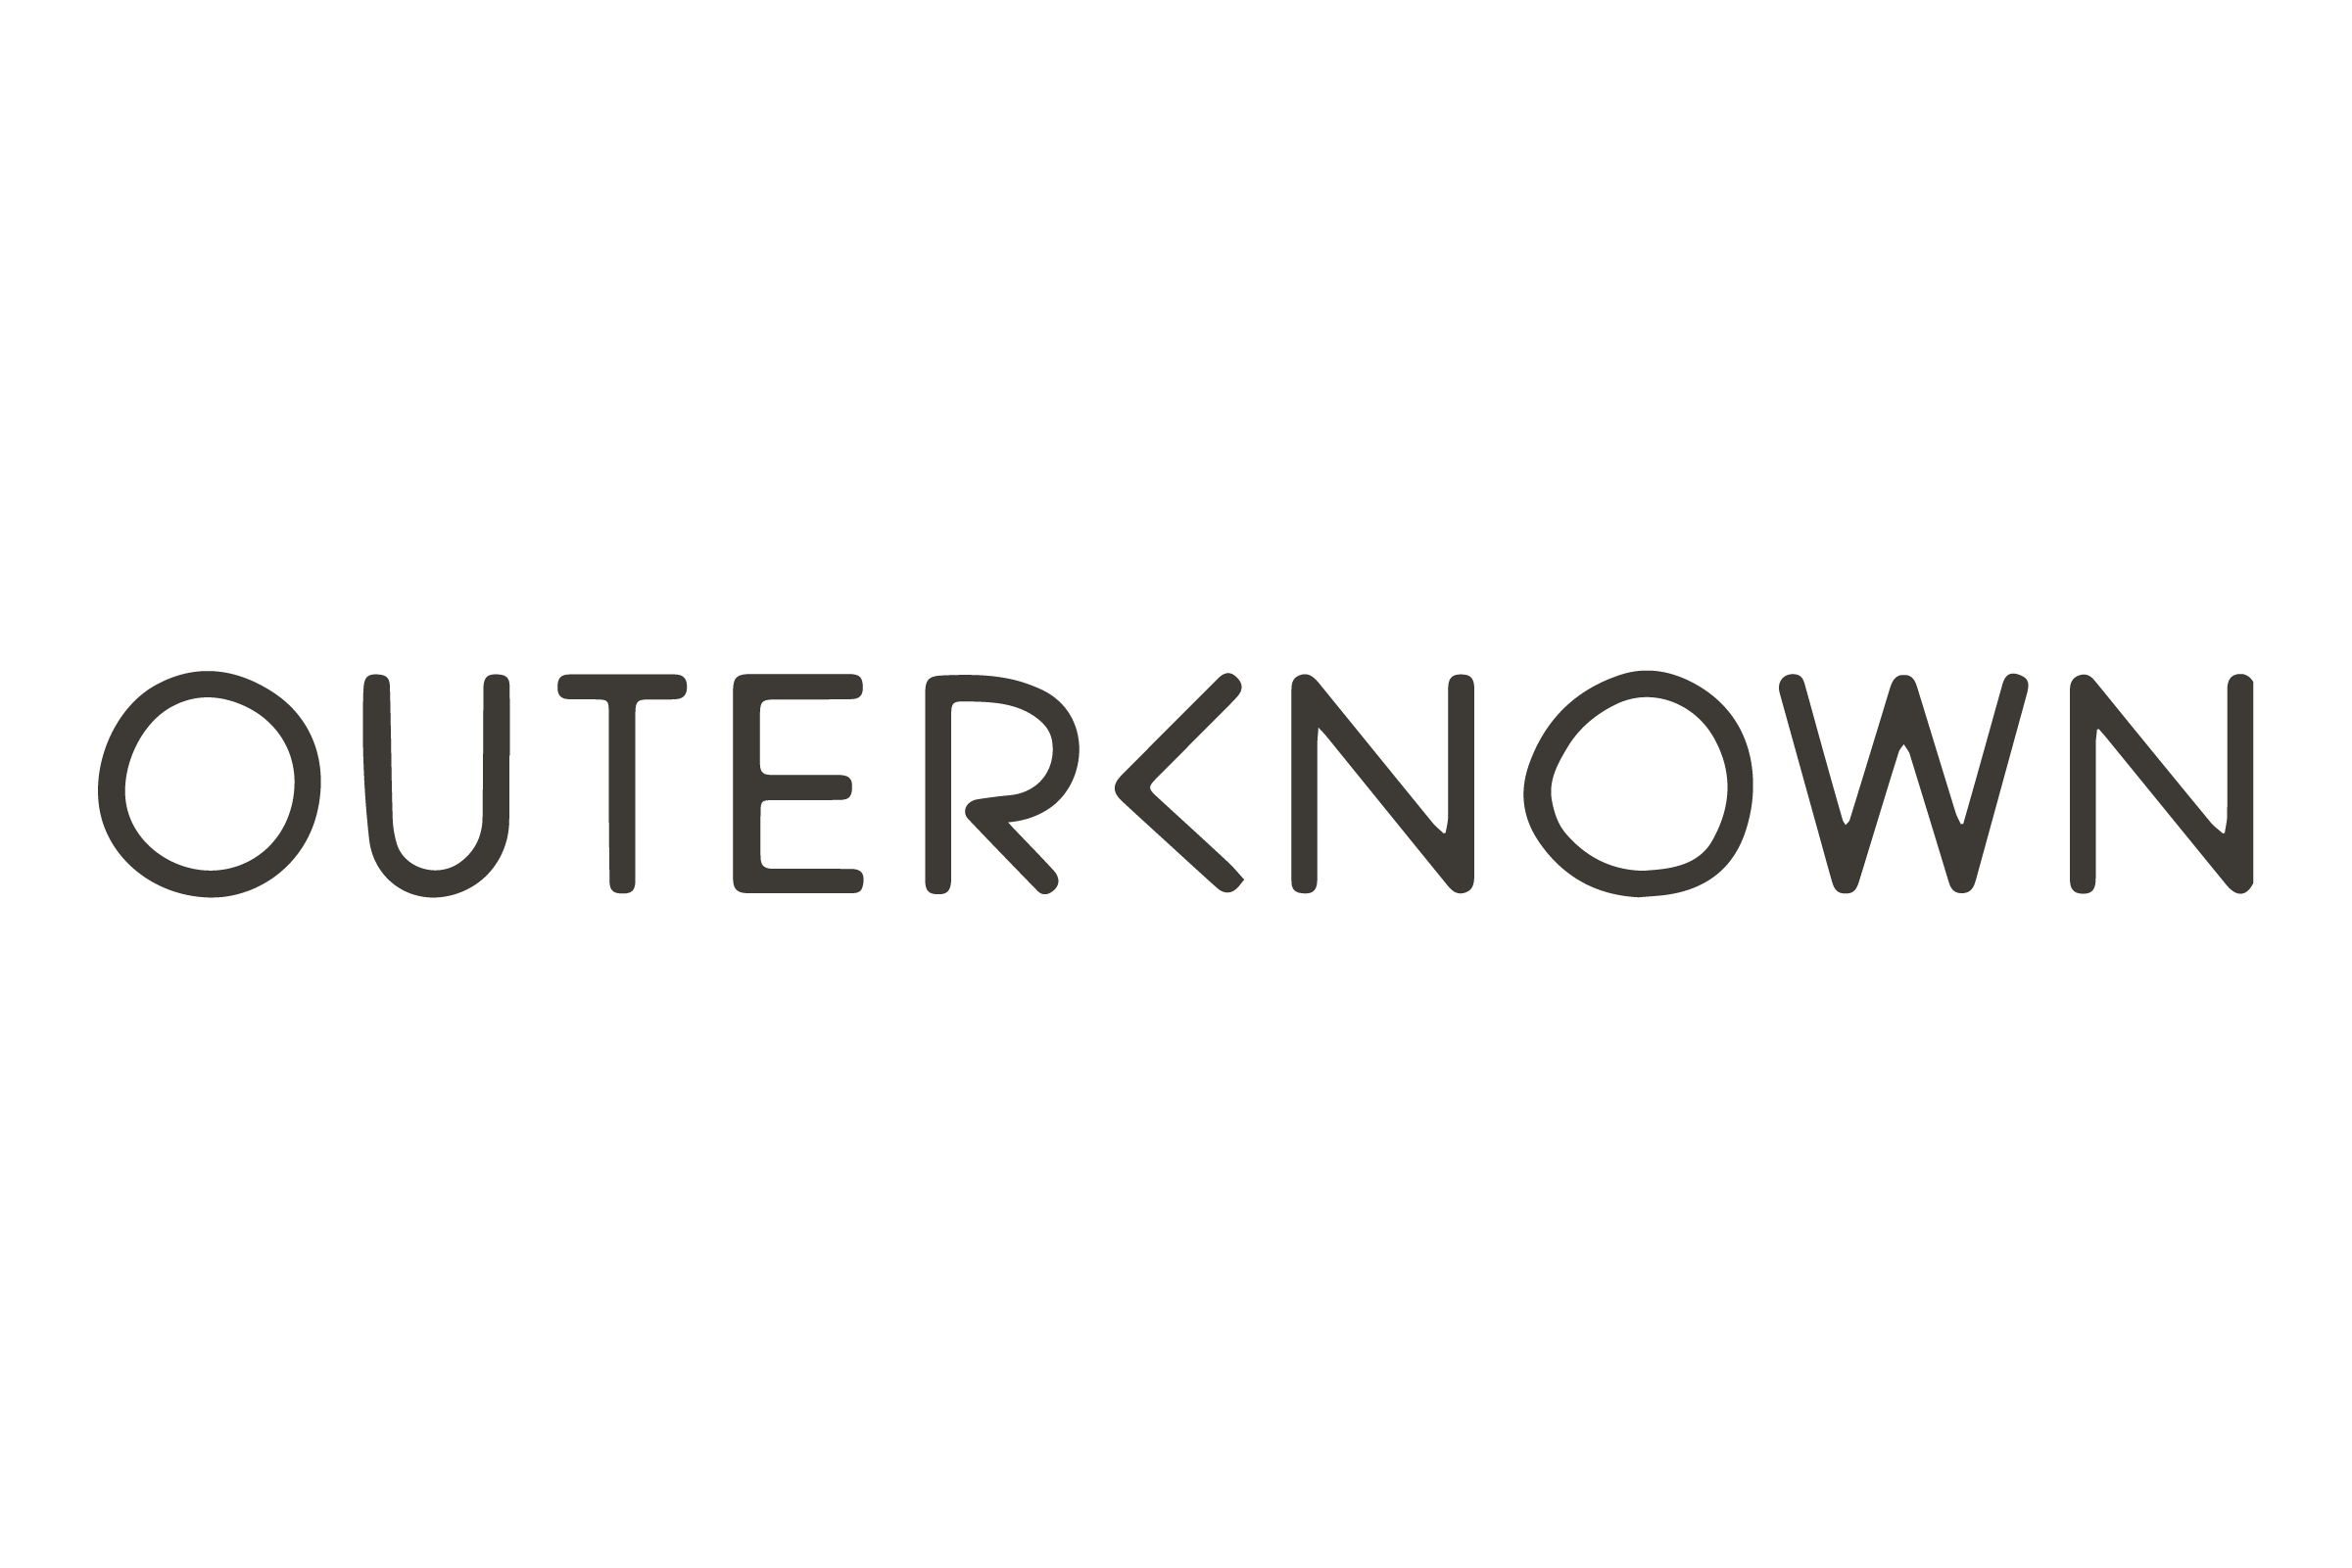 CircularSystems_Logo_Partner_Brands_Outerknown@2x.png